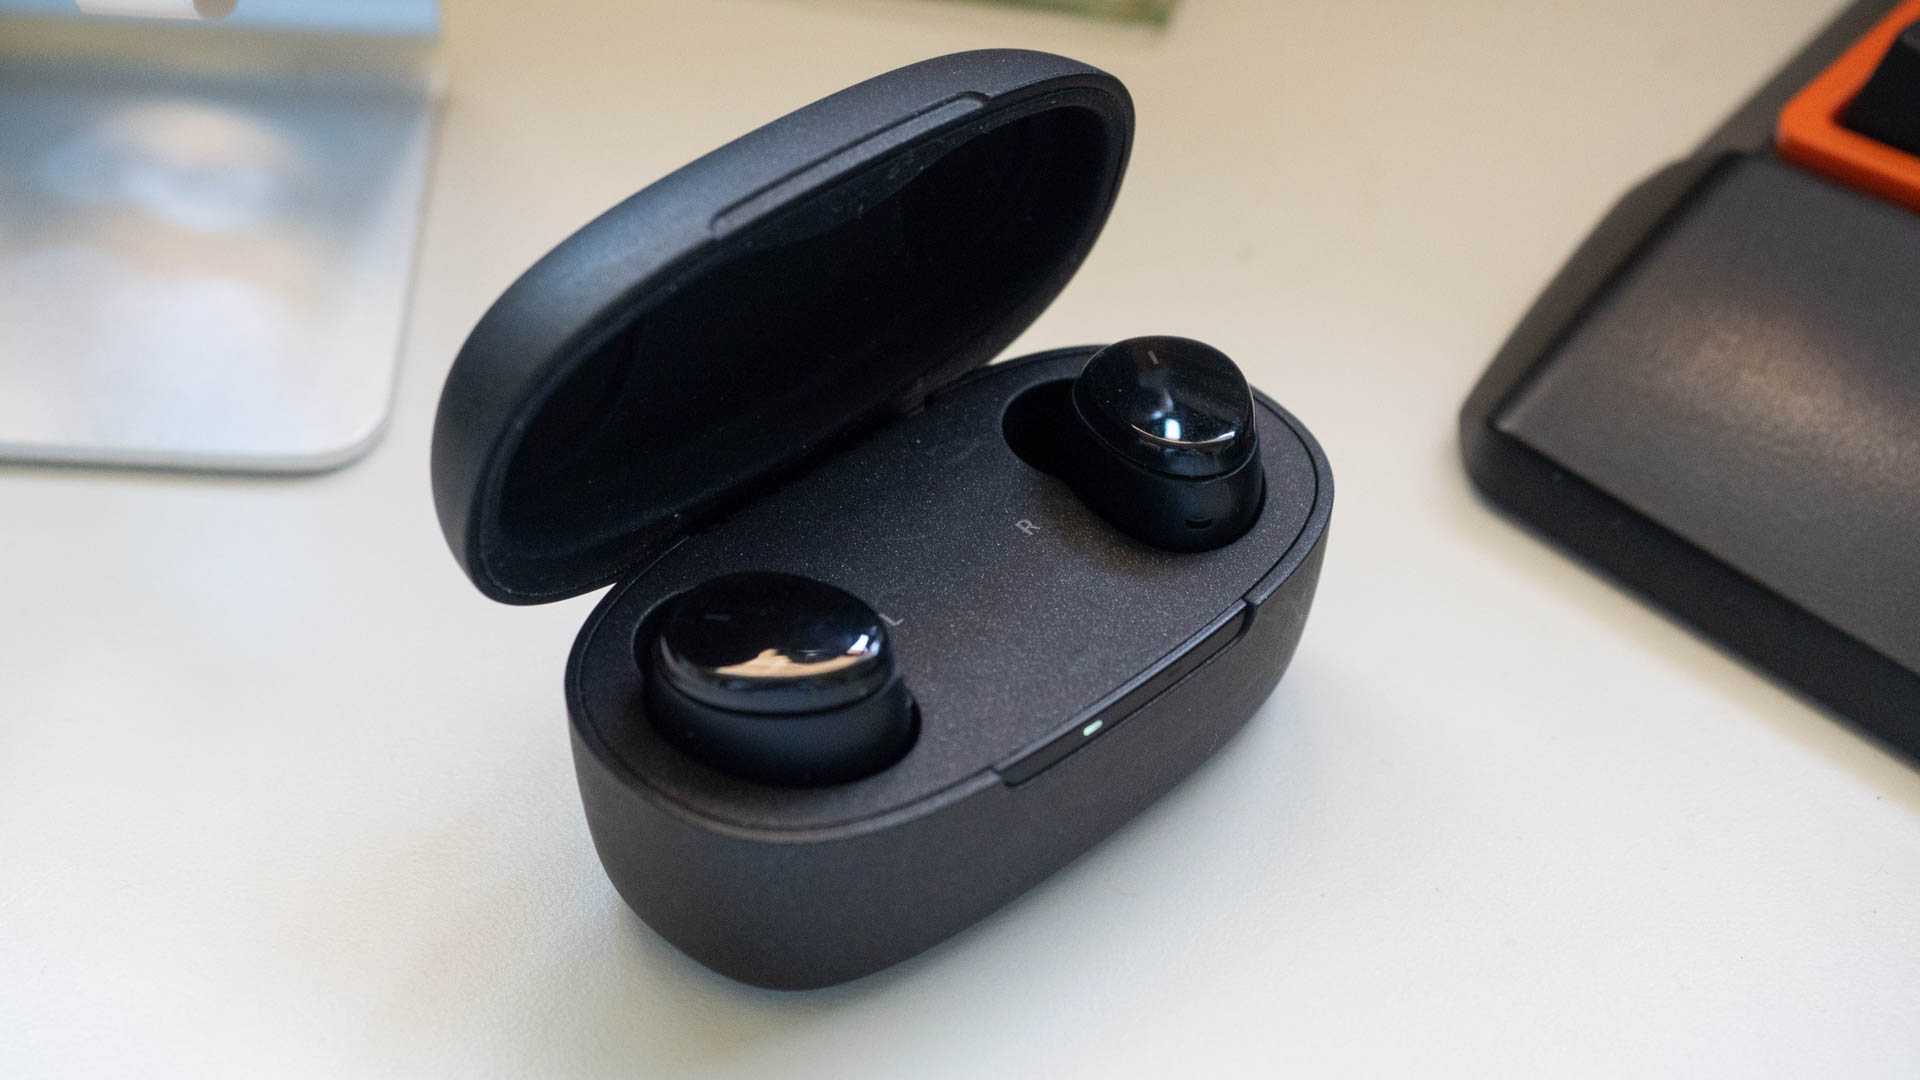 Optoma nuforce be free5 truly wireless earbuds with 16h battery life and quick charge, sweat proof, aac support, activate siri and google assistant